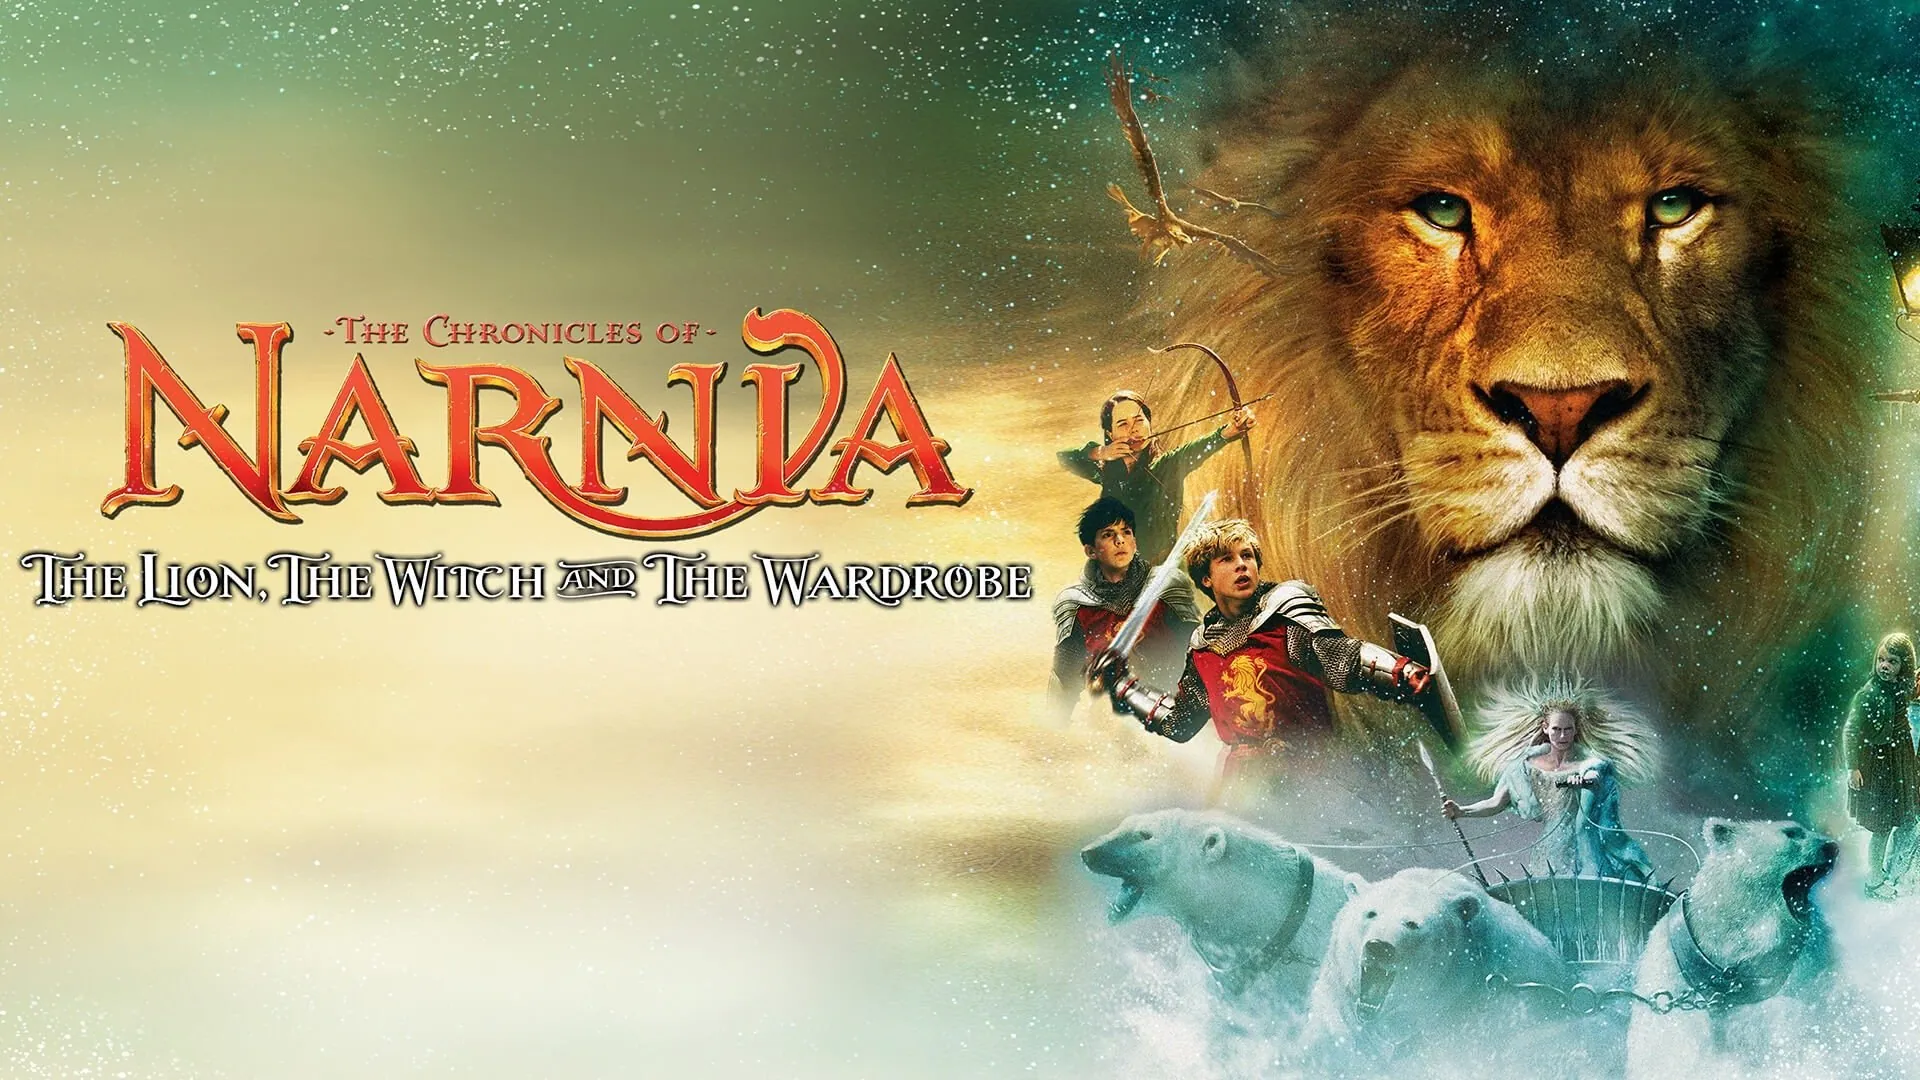 The Chronicles of Narnia)